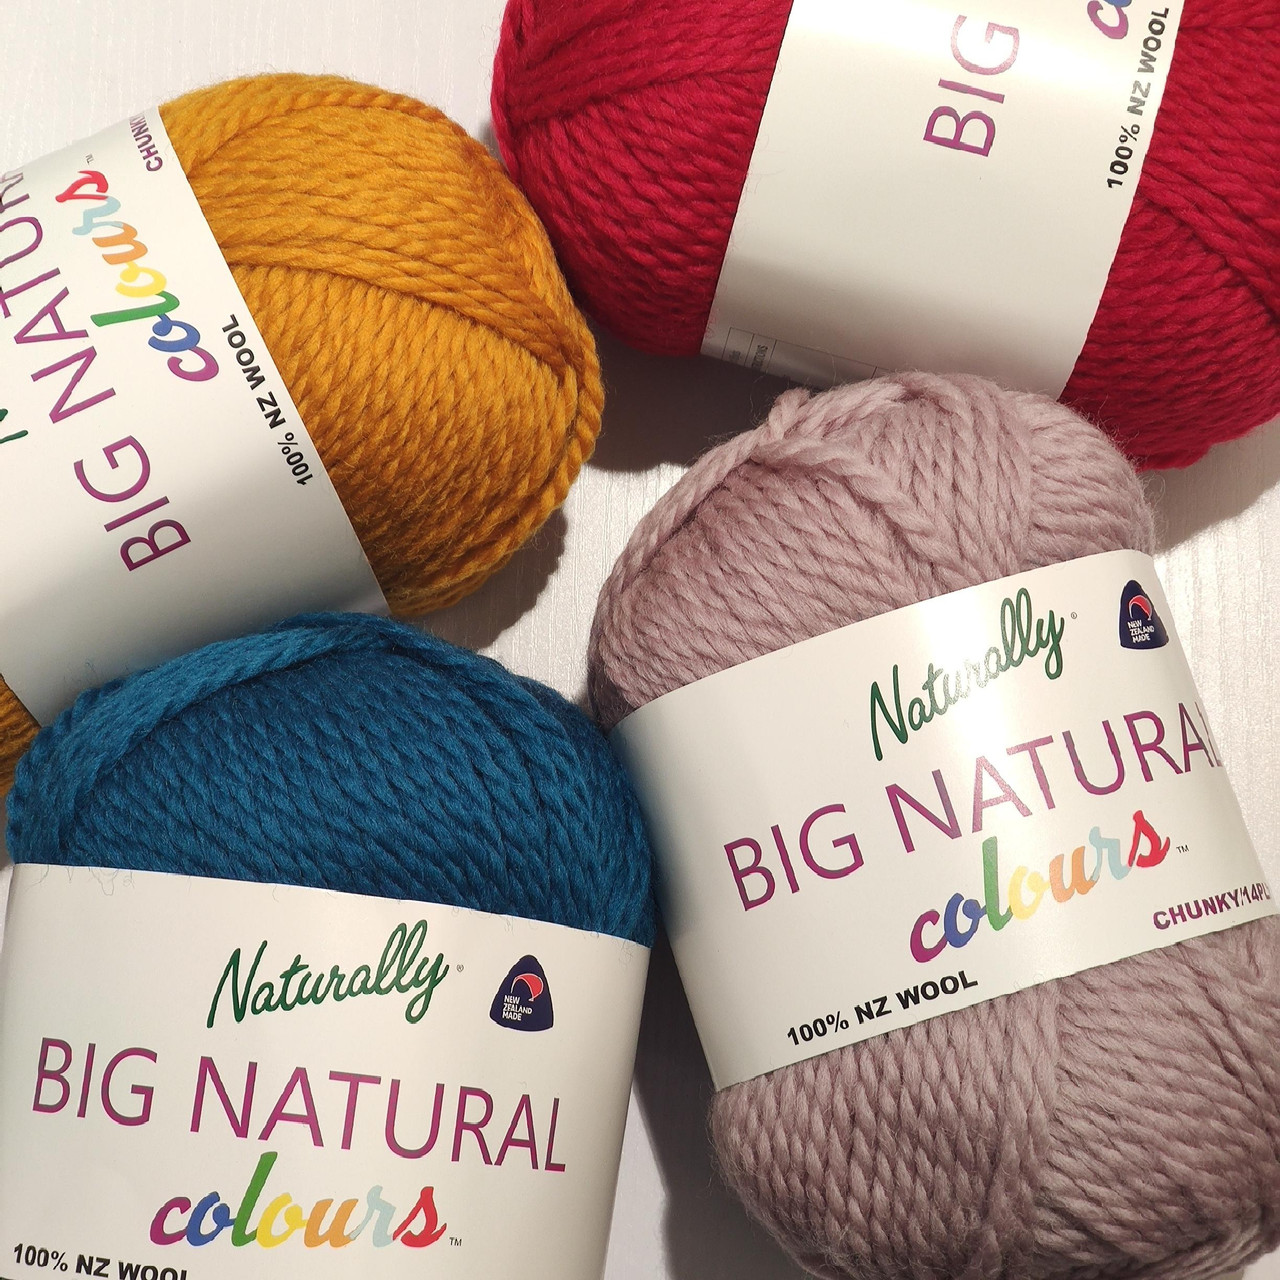 Naturally: Big Natural Colours: 14ply/Chunky - Wellington Sewing